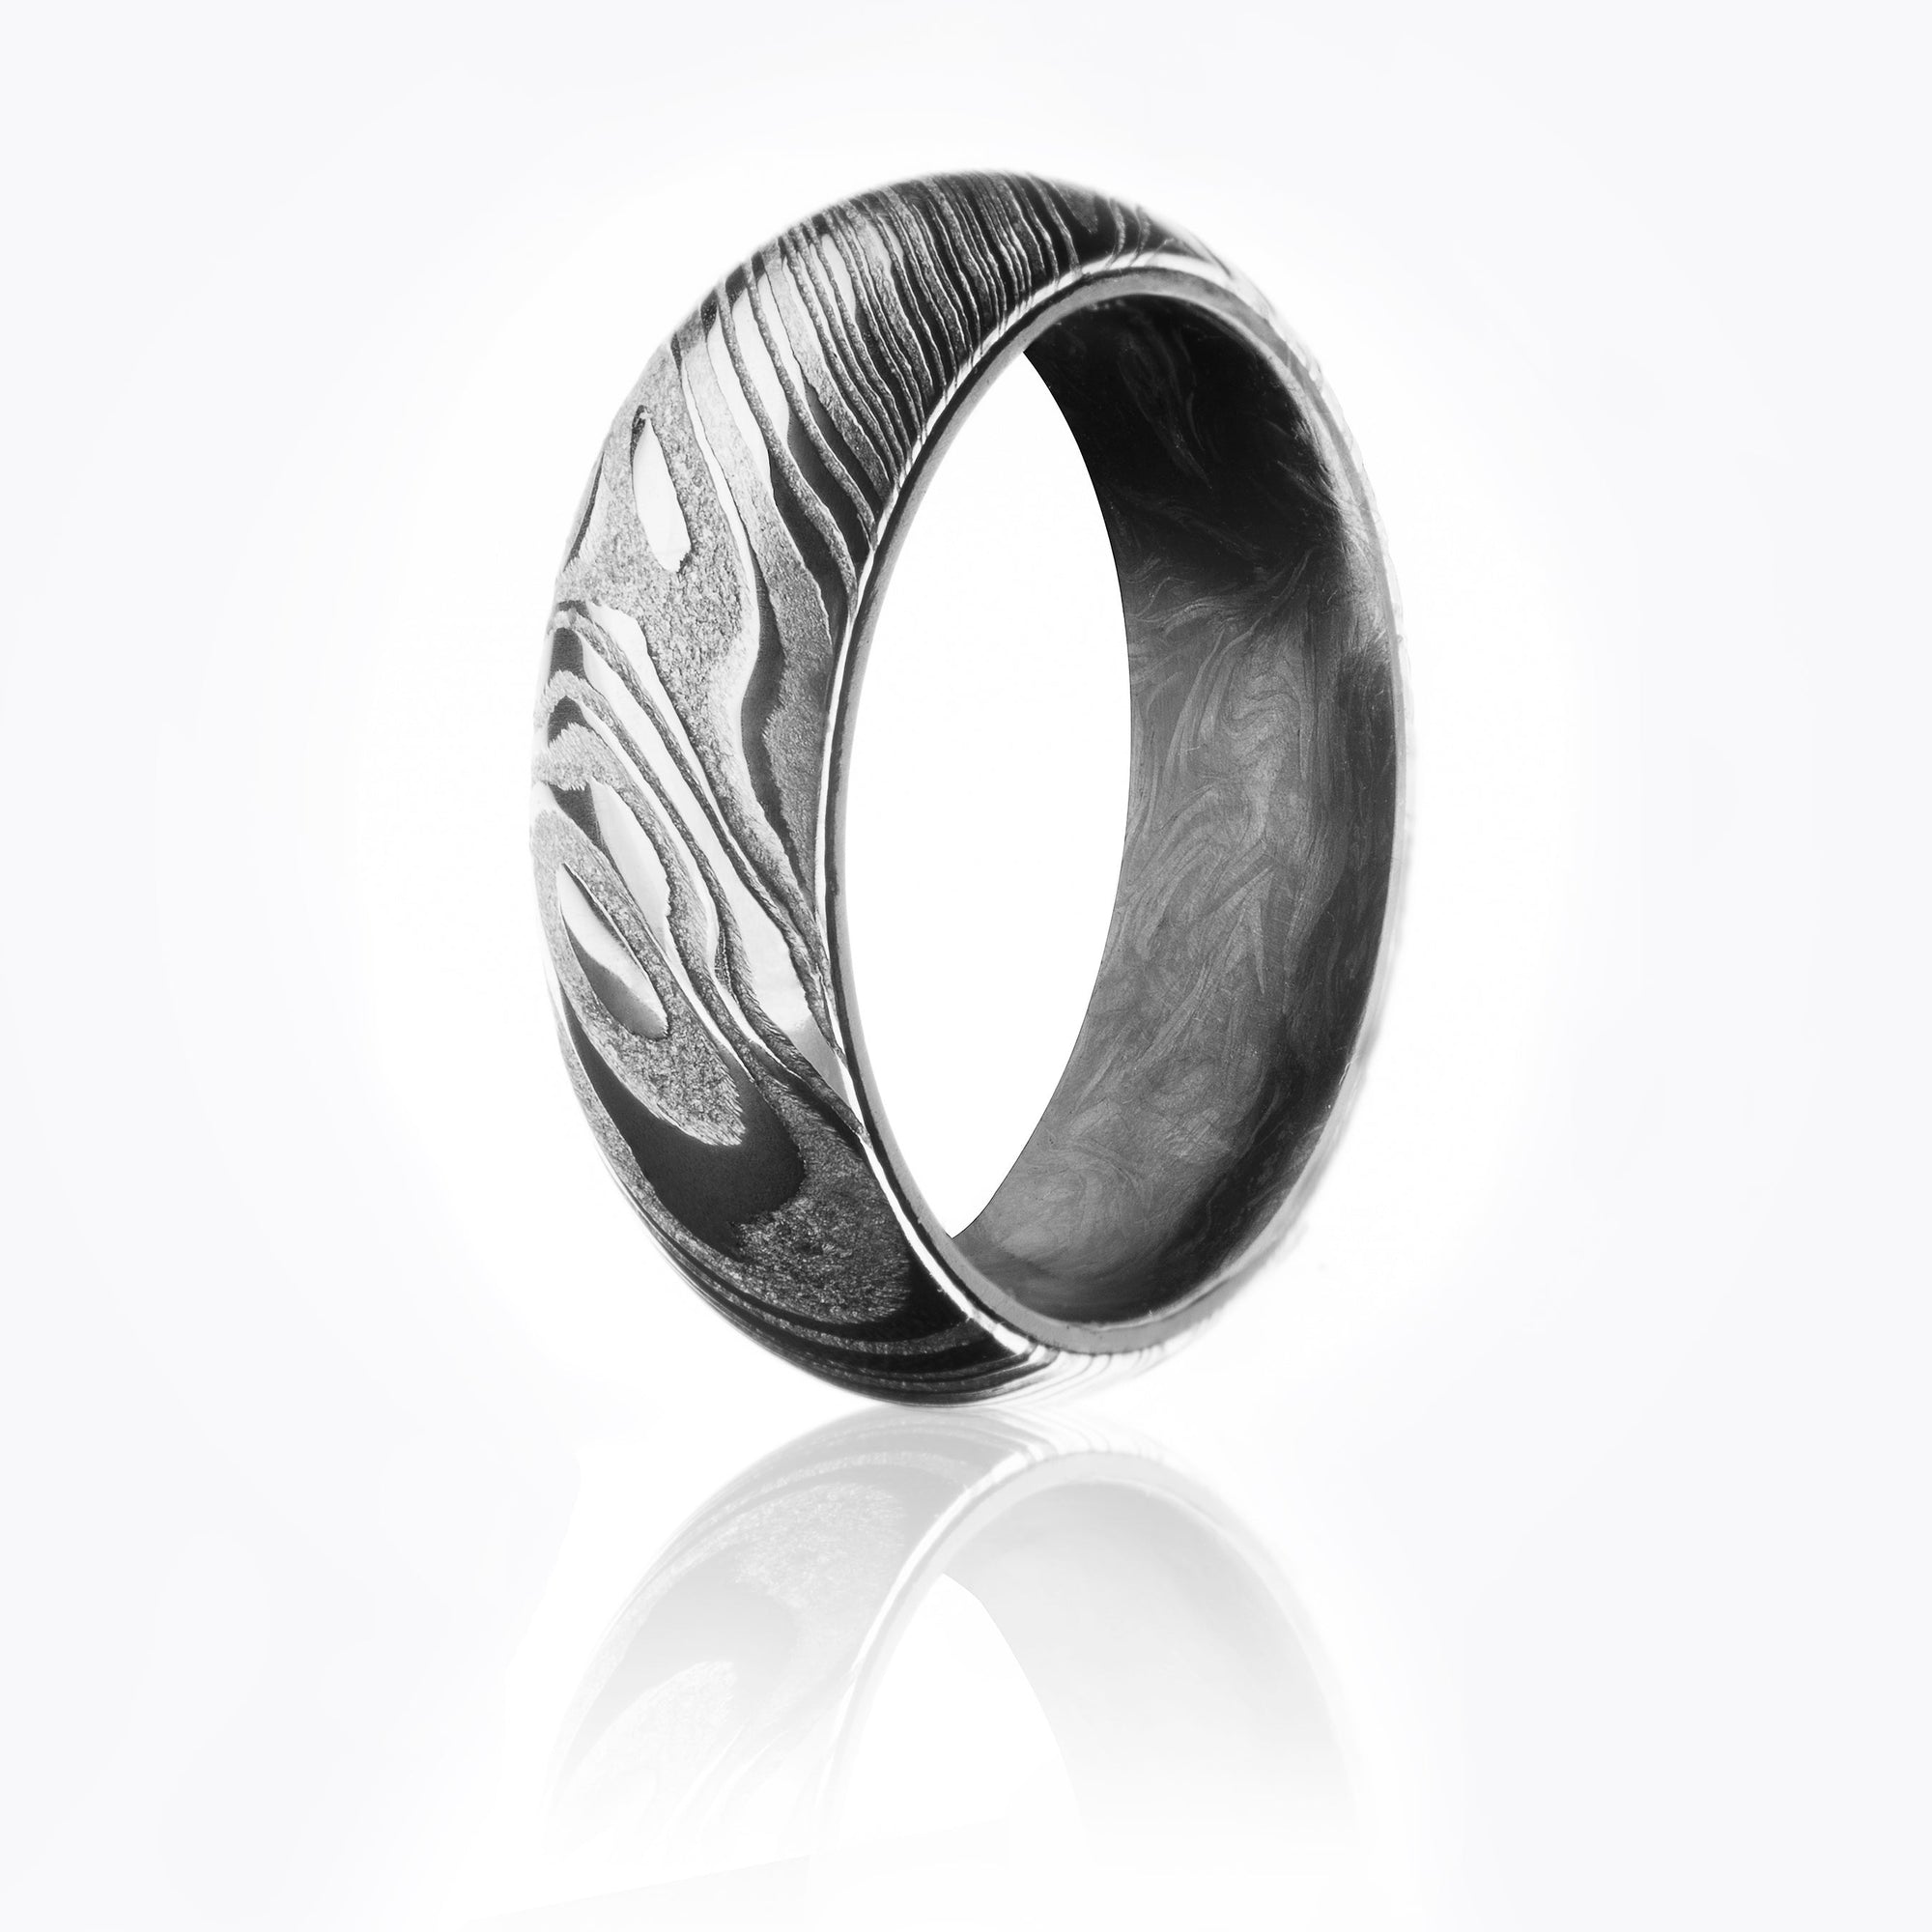 Damascus Steel ring with textured woodgrain patterned exterior and forged carbon fiber interior. 